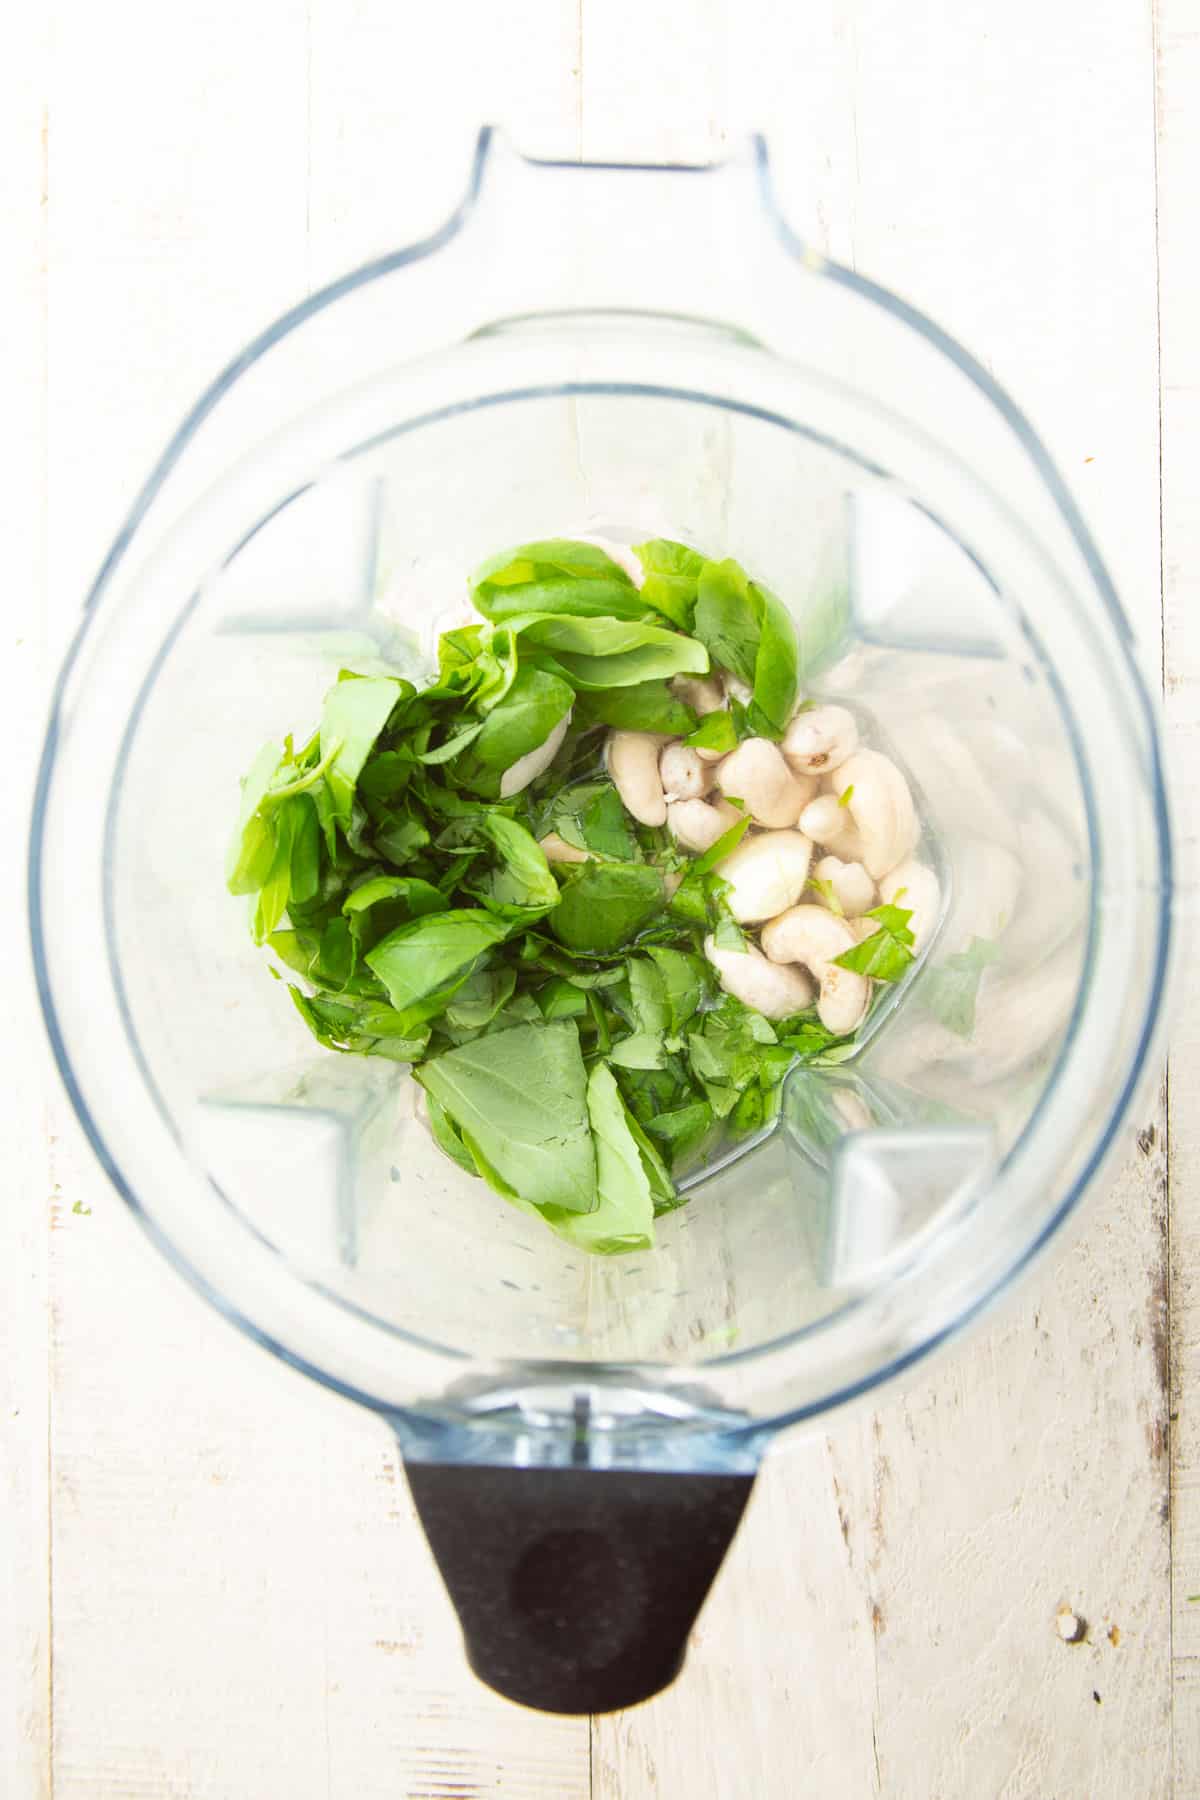 Ingredients for making cashew basil cream in a blender.